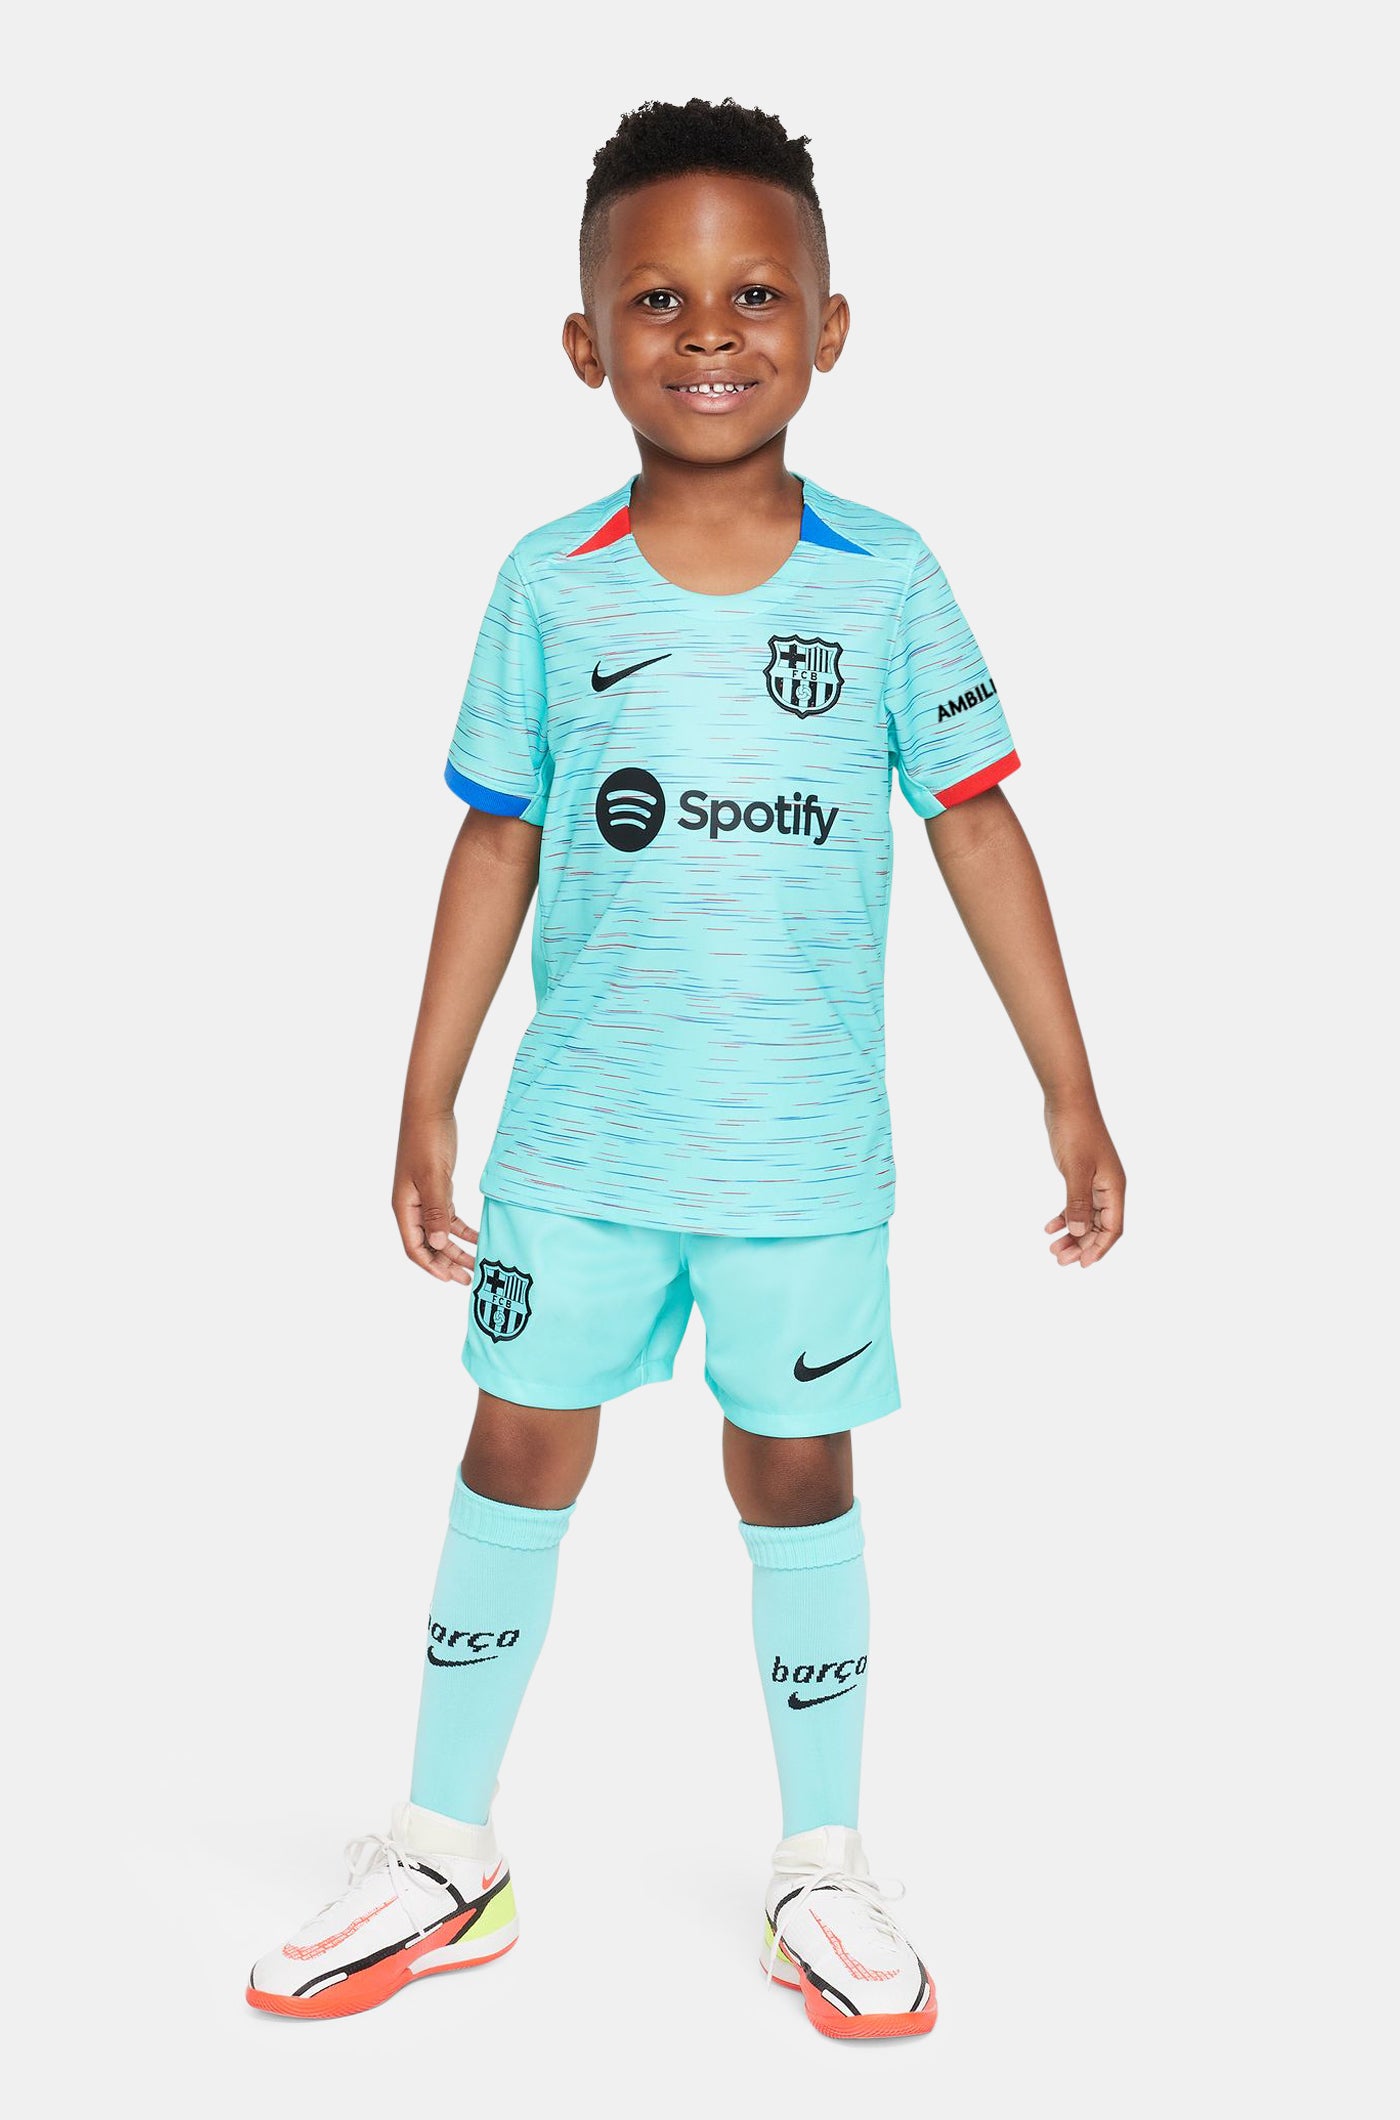 FC Barcelona third Kit 23/24 – Younger Kids  - MARCOS A.